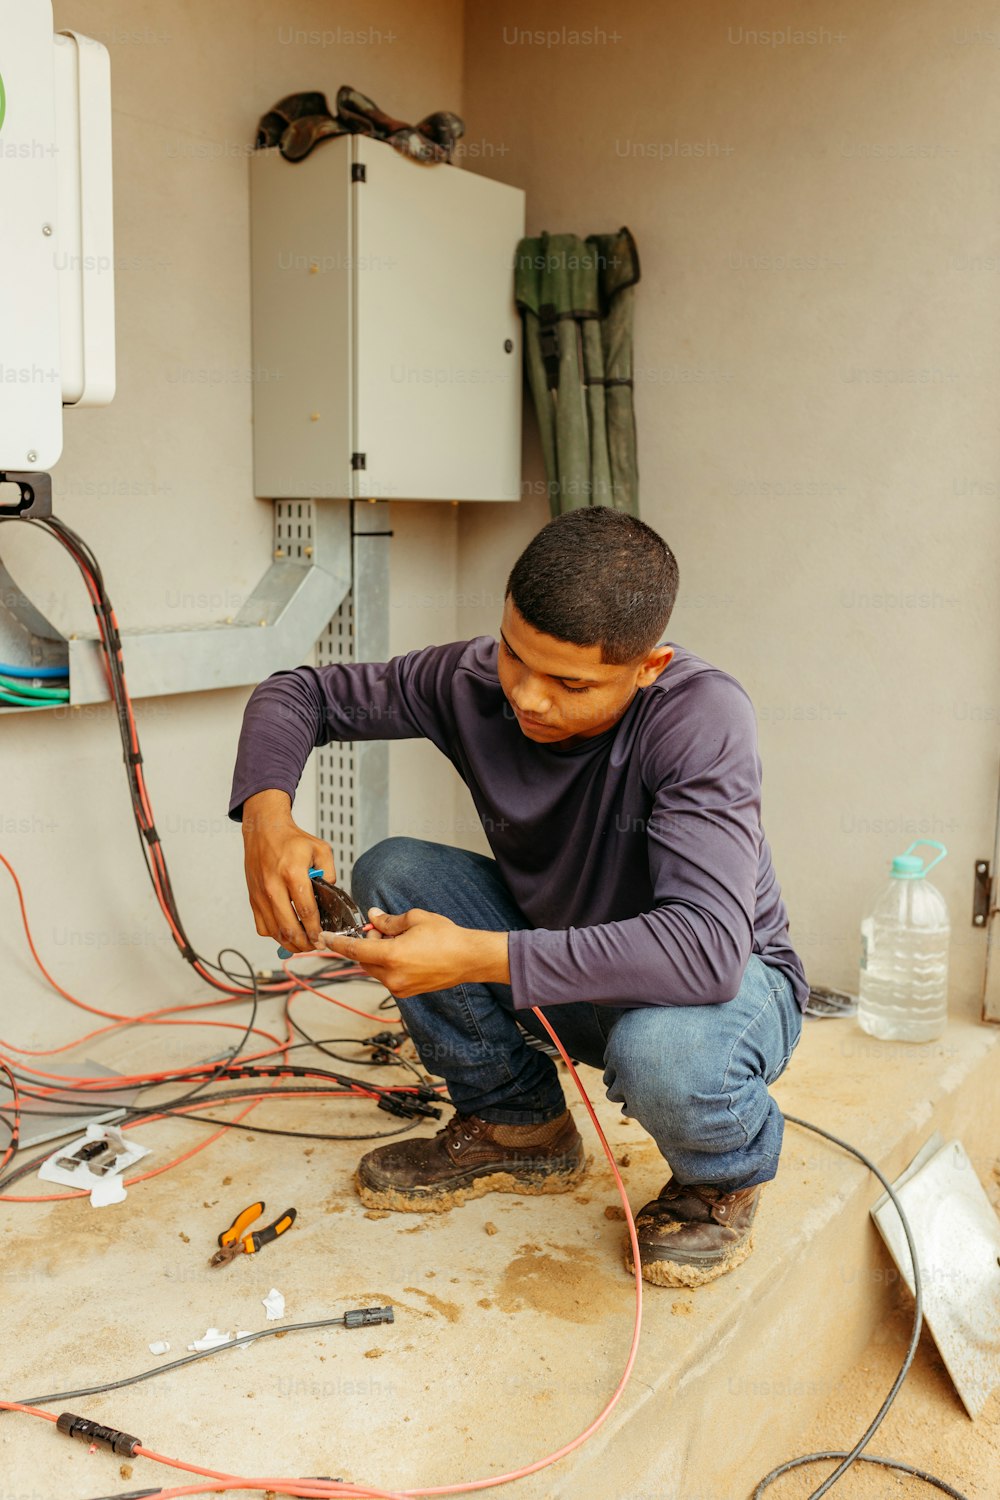 a man is working on some electrical equipment